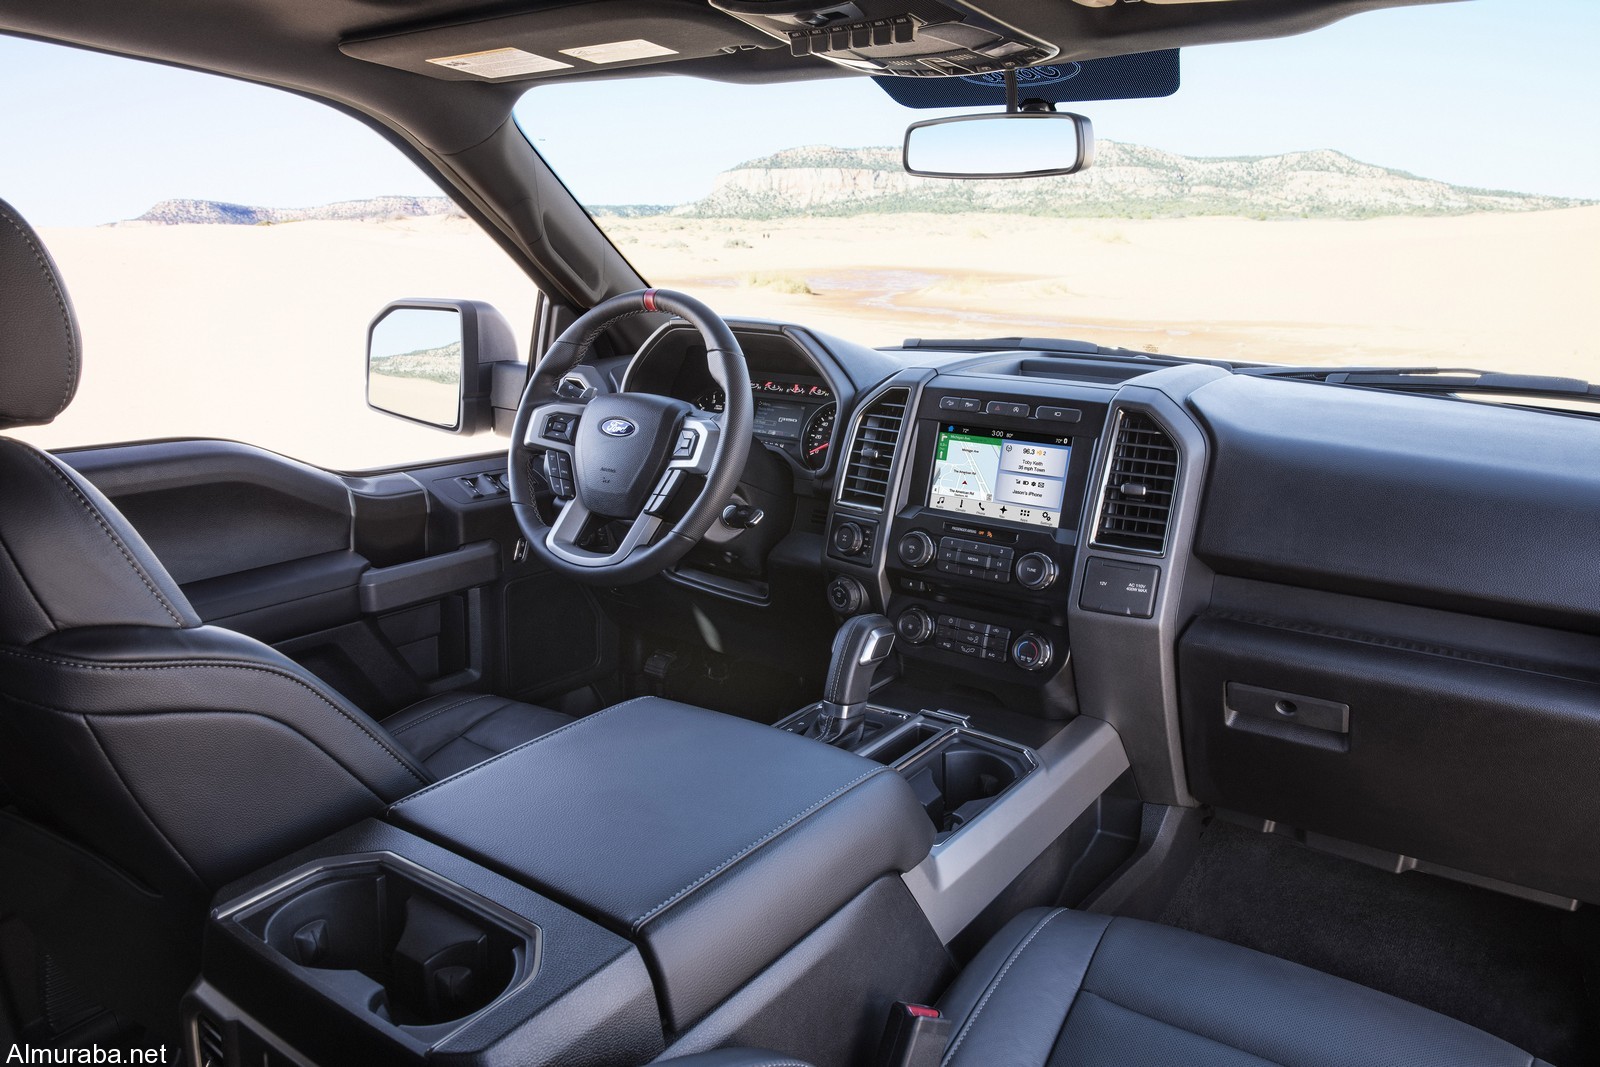 While the exterior design of the all-new Ford F-150 Raptor (SuperCrew model pictured) is about rugged capability and toughness, the interior design is about creating a comfortable place for driver and passengers to enjoy their time on- and off-road. Added content includes unique color materials and appearance levels, plus paddle shifters to manually shift Raptor’s 10-speed transmission.